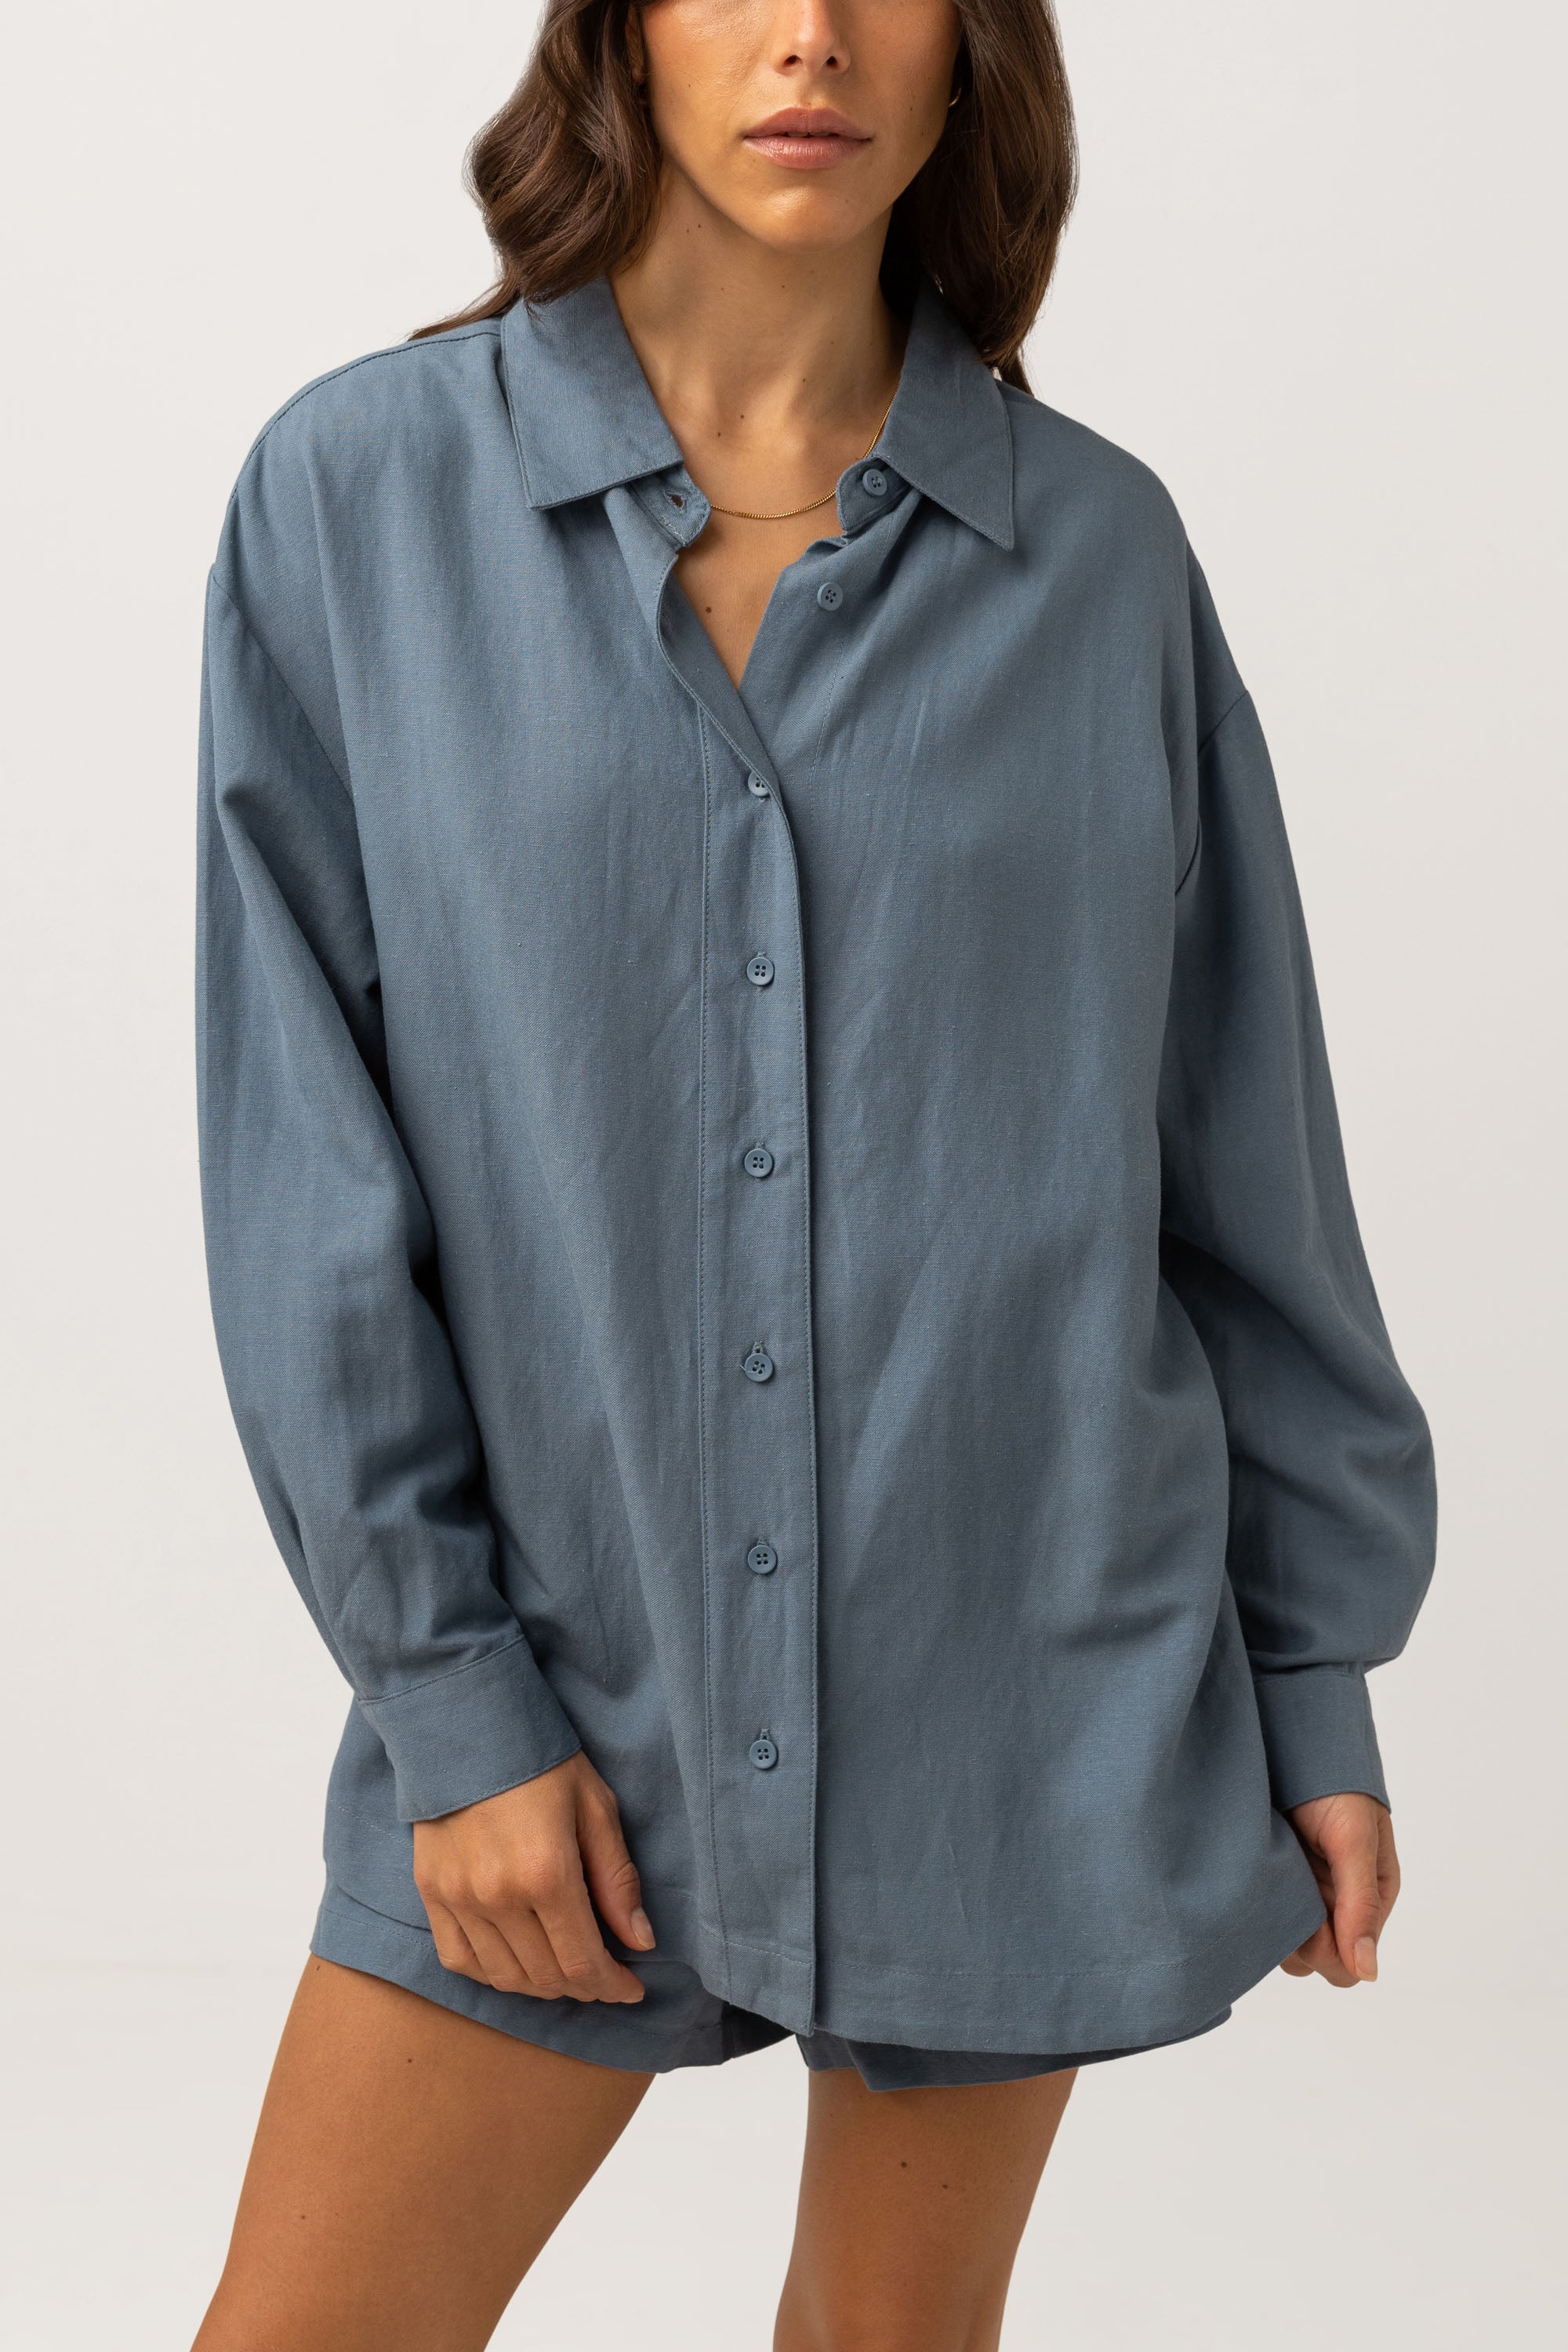 Dream Time Oversized Shirt- Dusted Teal